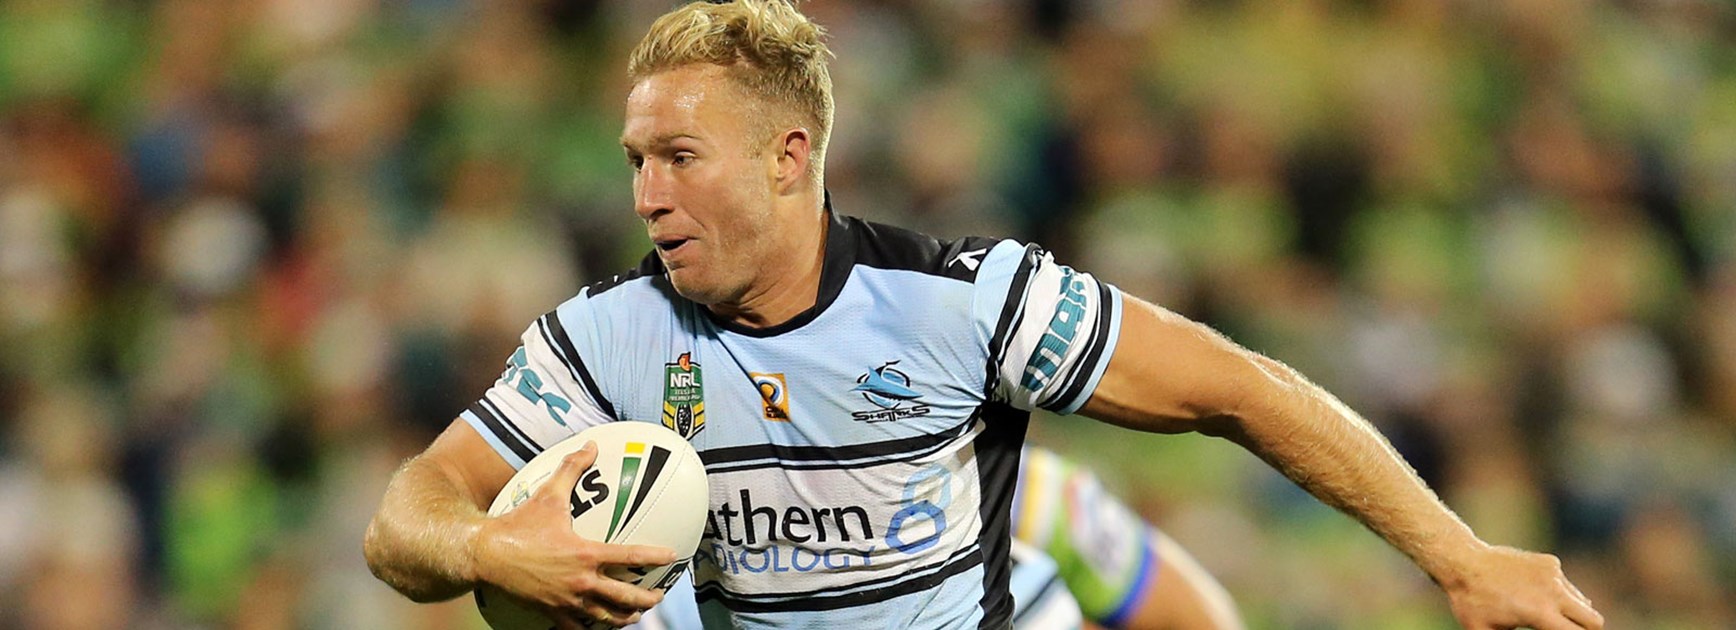 Sharks prop Matt Prior scored a try against the Raiders in the first week of the finals.